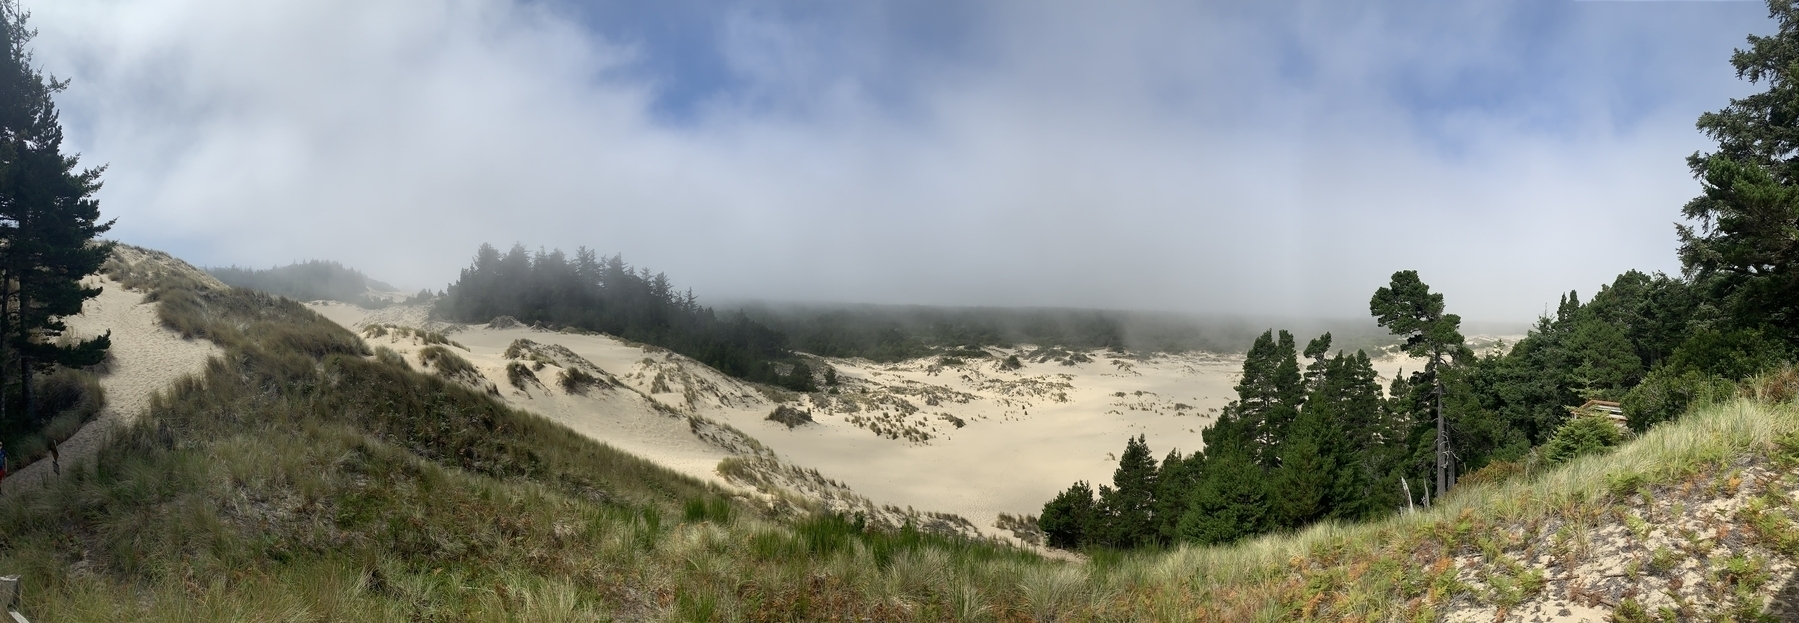 Sand dunes surrounded by grass and forest in the distance with low hanging clouds 